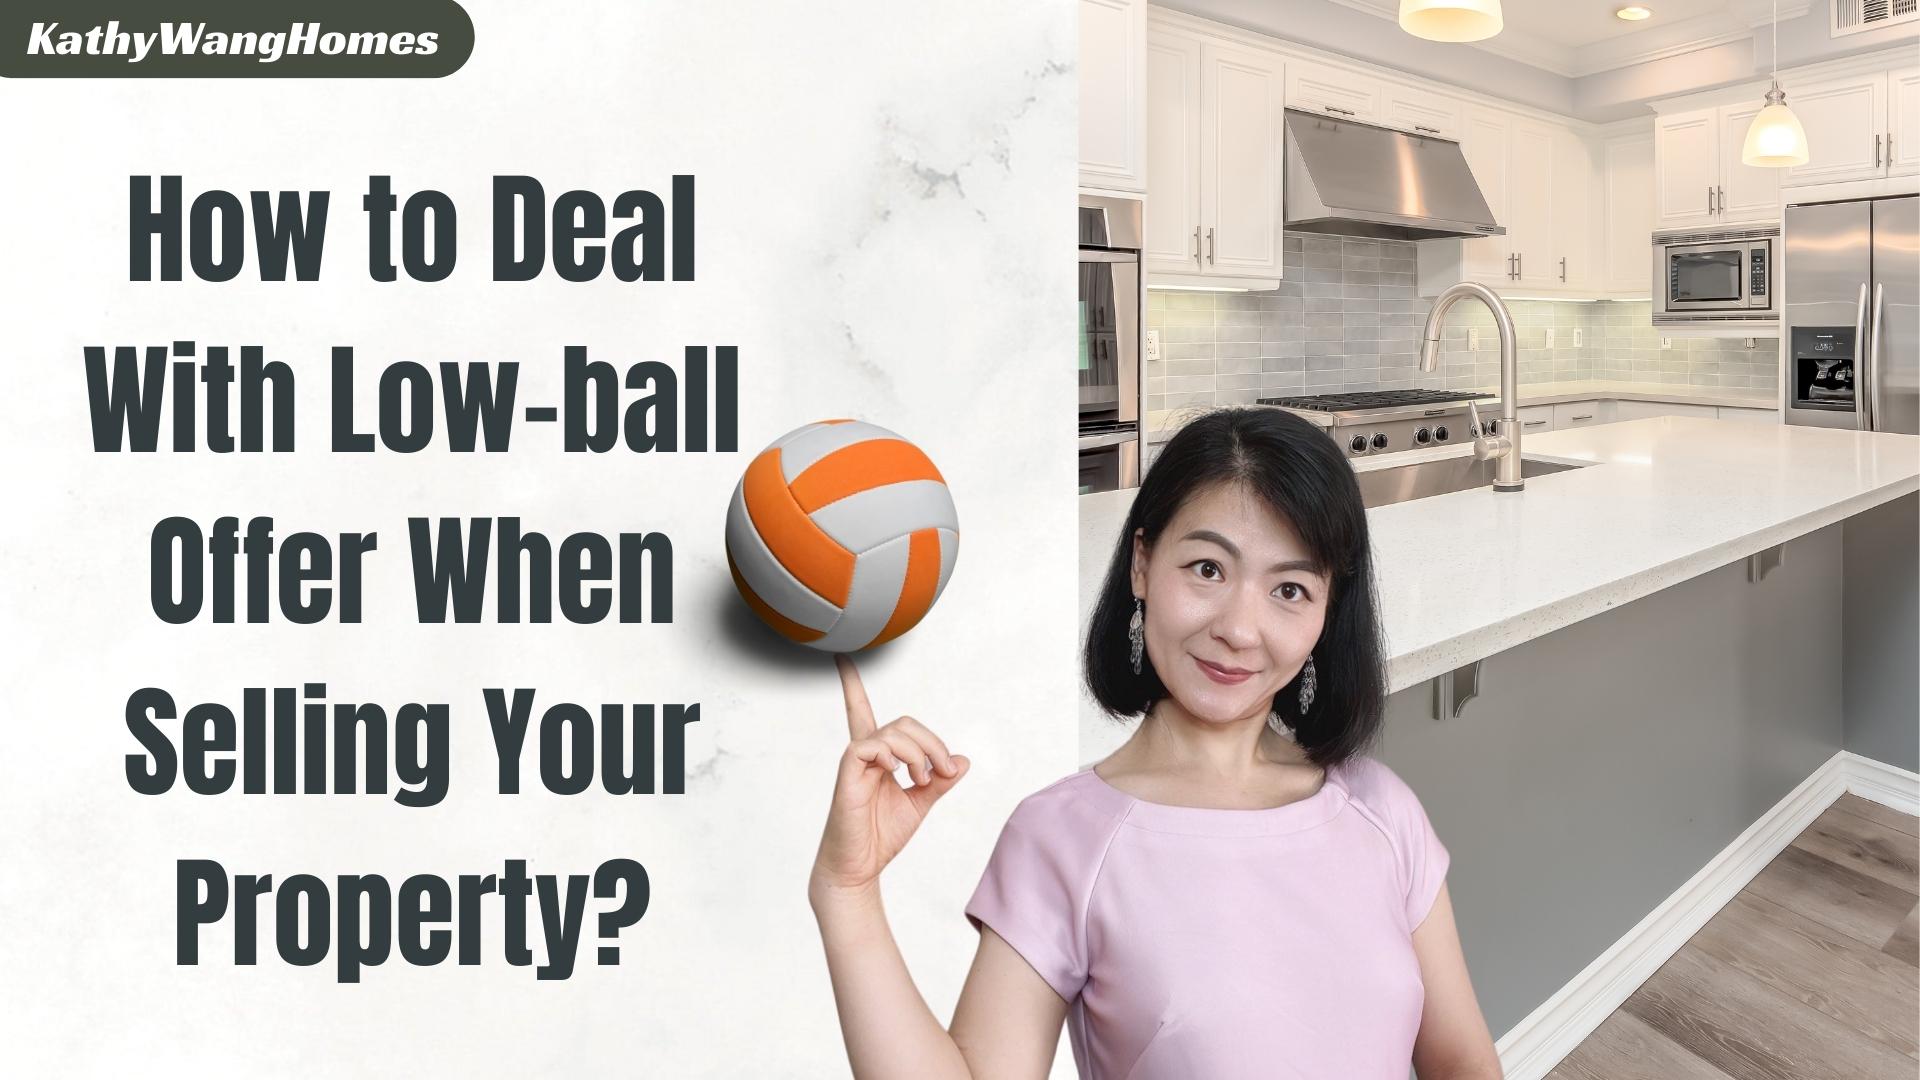 How to deal with low-ball offer when selling your home